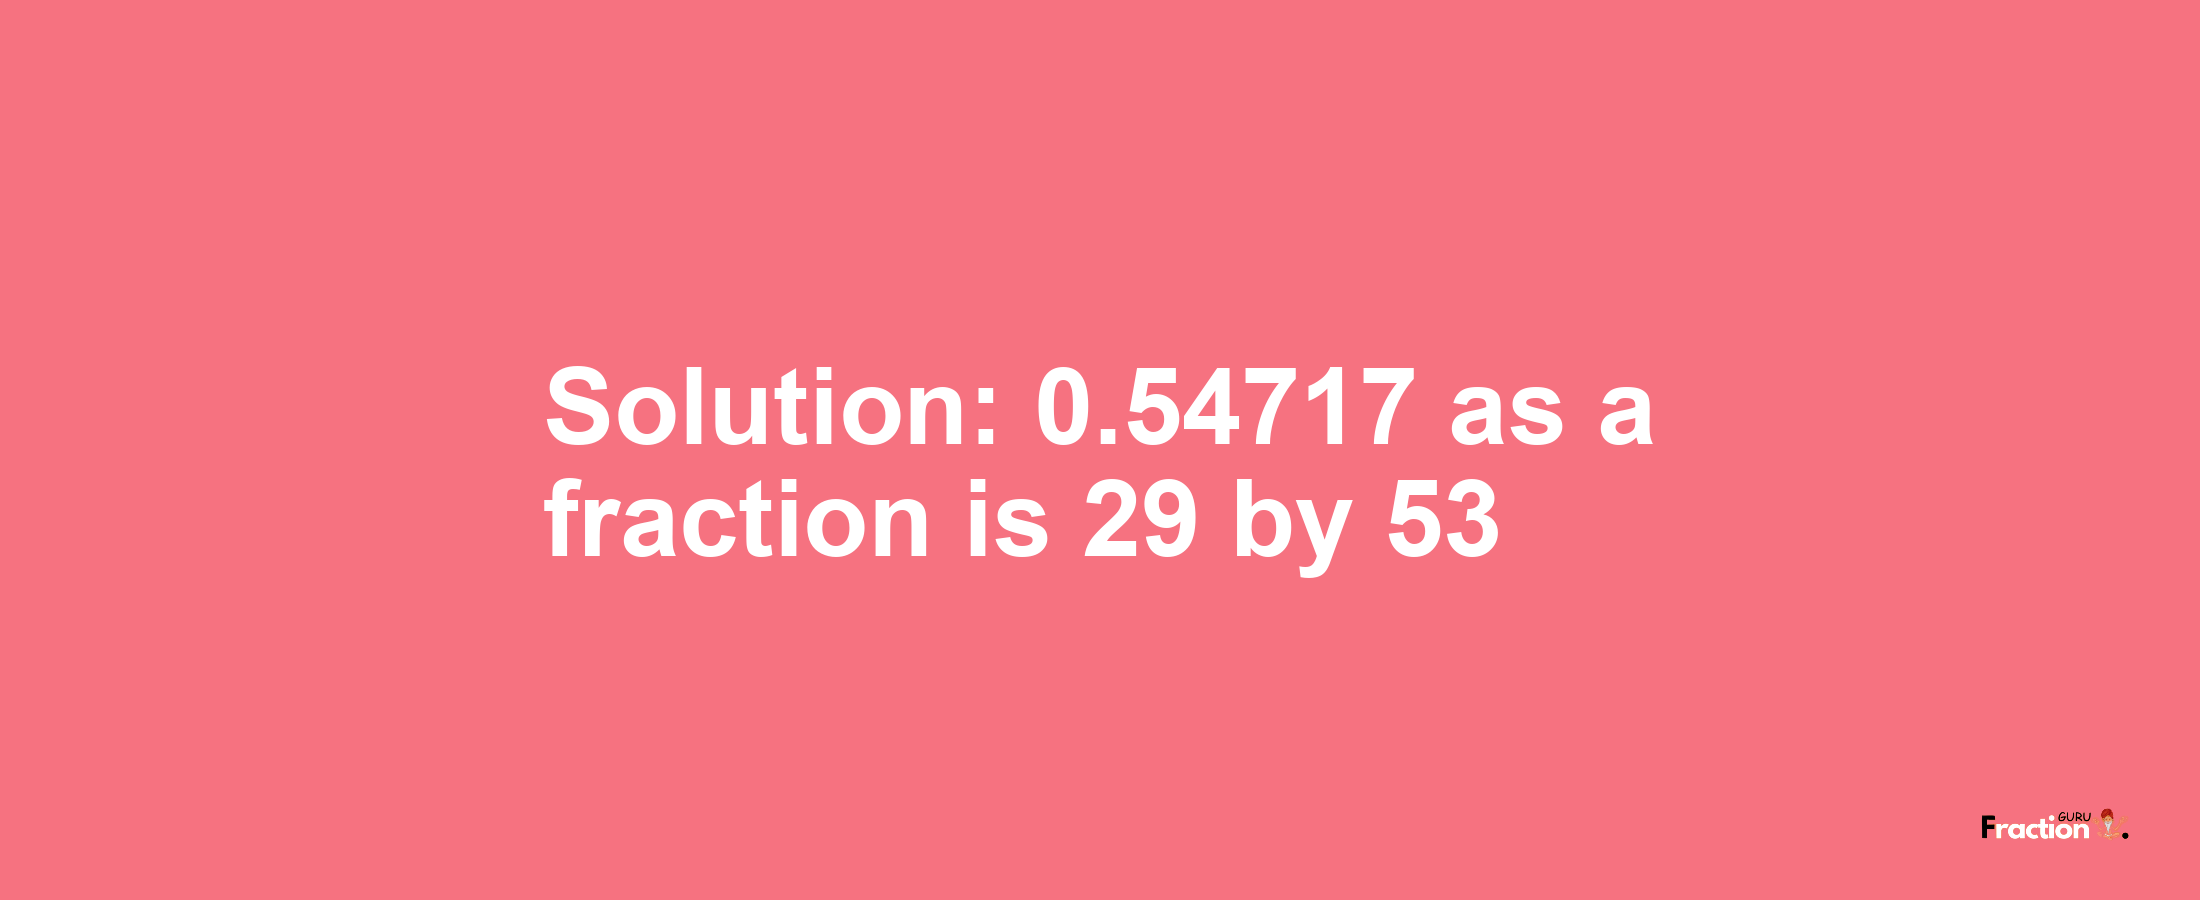 Solution:0.54717 as a fraction is 29/53